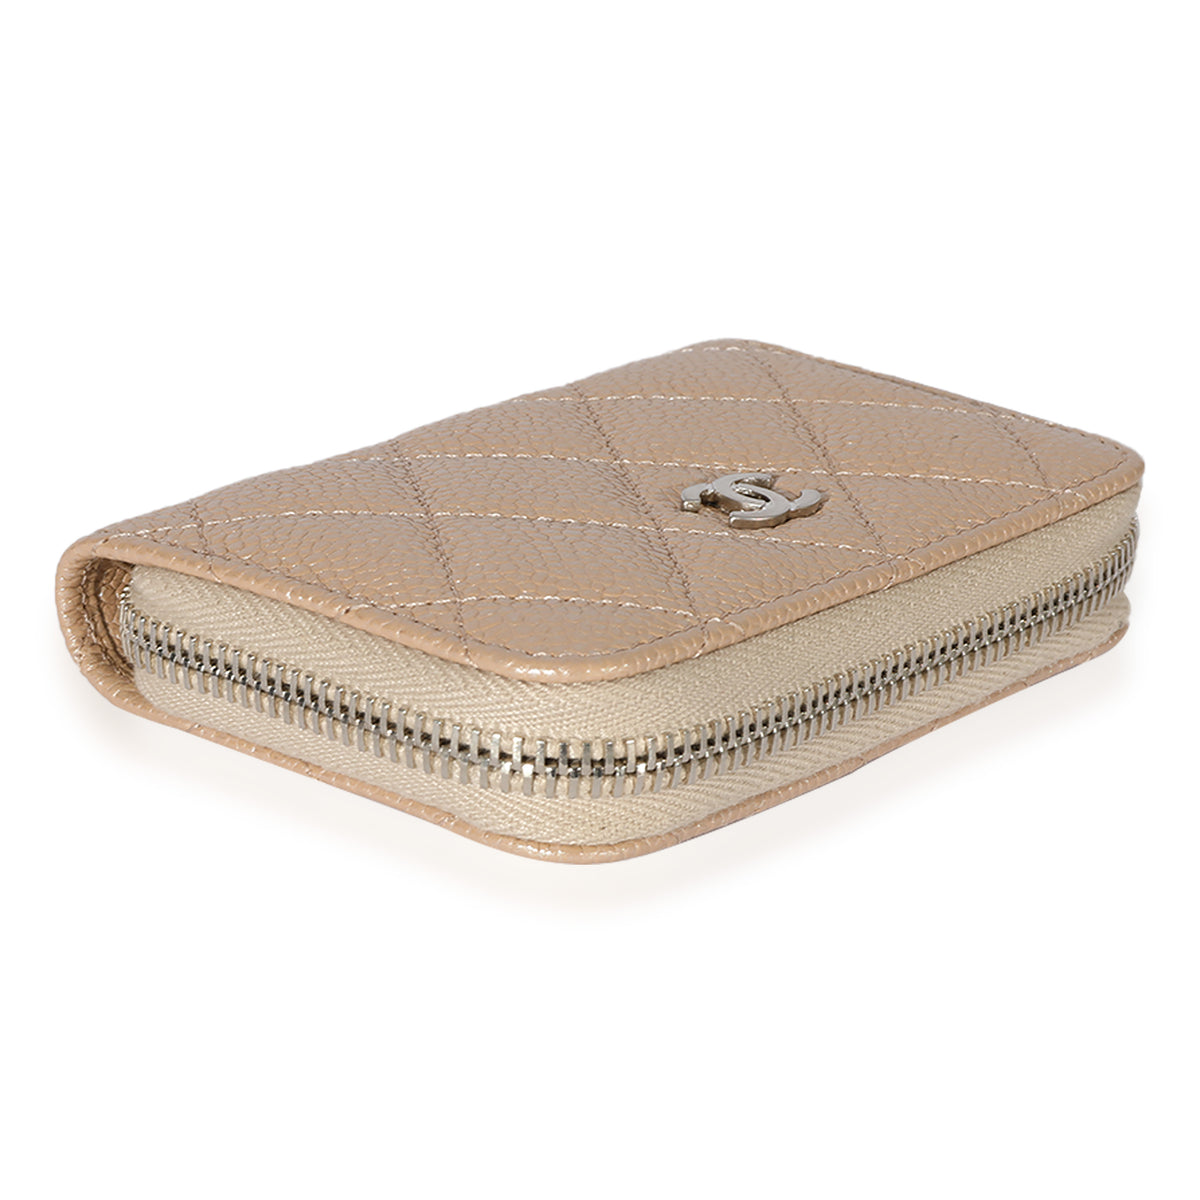 Chanel Pearly Beige Quilted Caviar Zip-Around Coin Purse